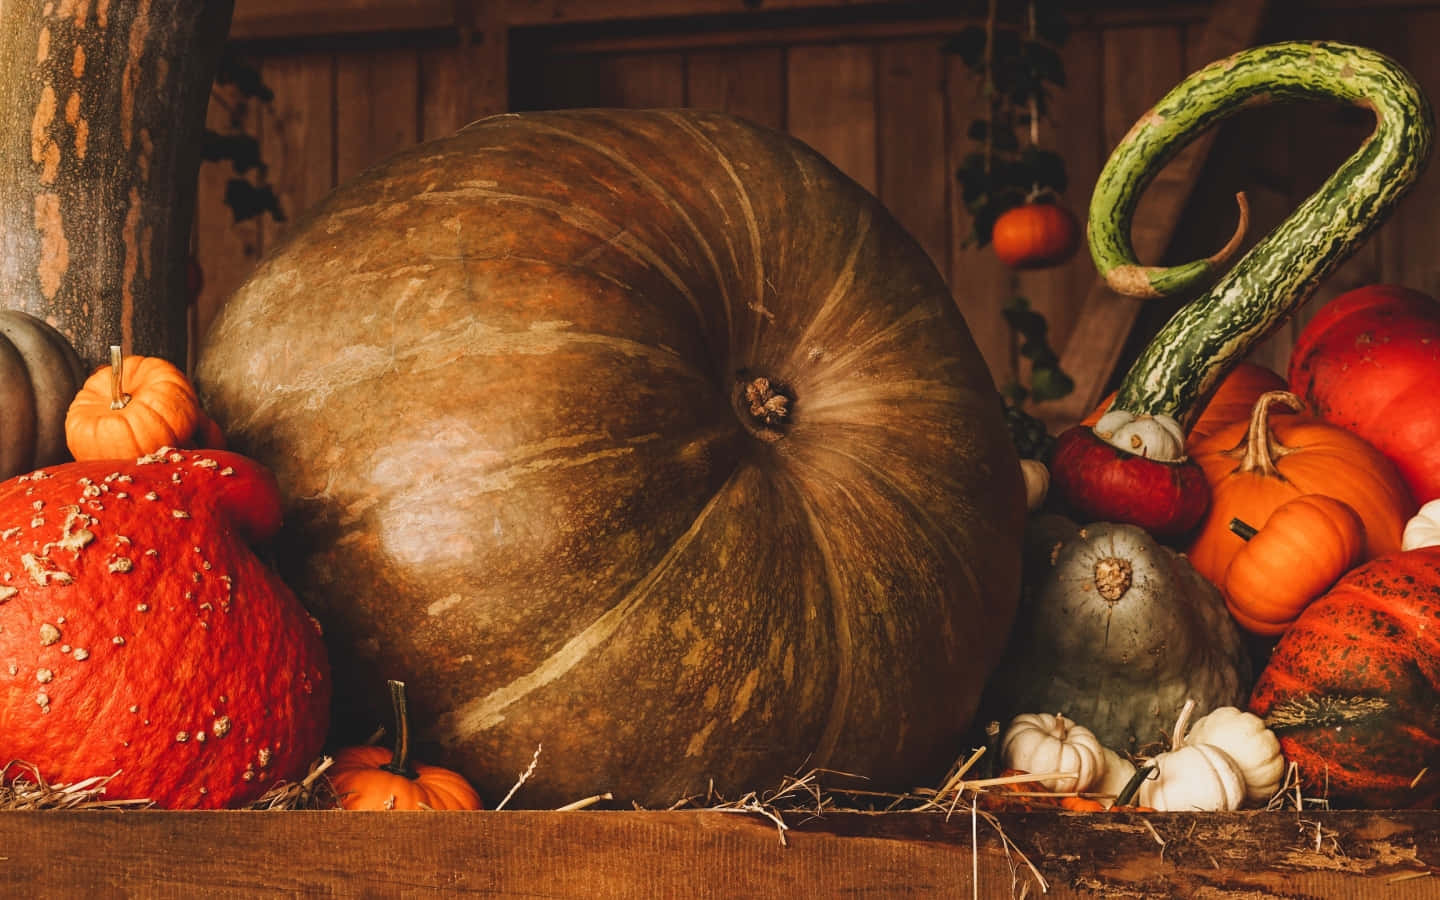 Bright orange pumpkins in the fall against a rustic wooden background